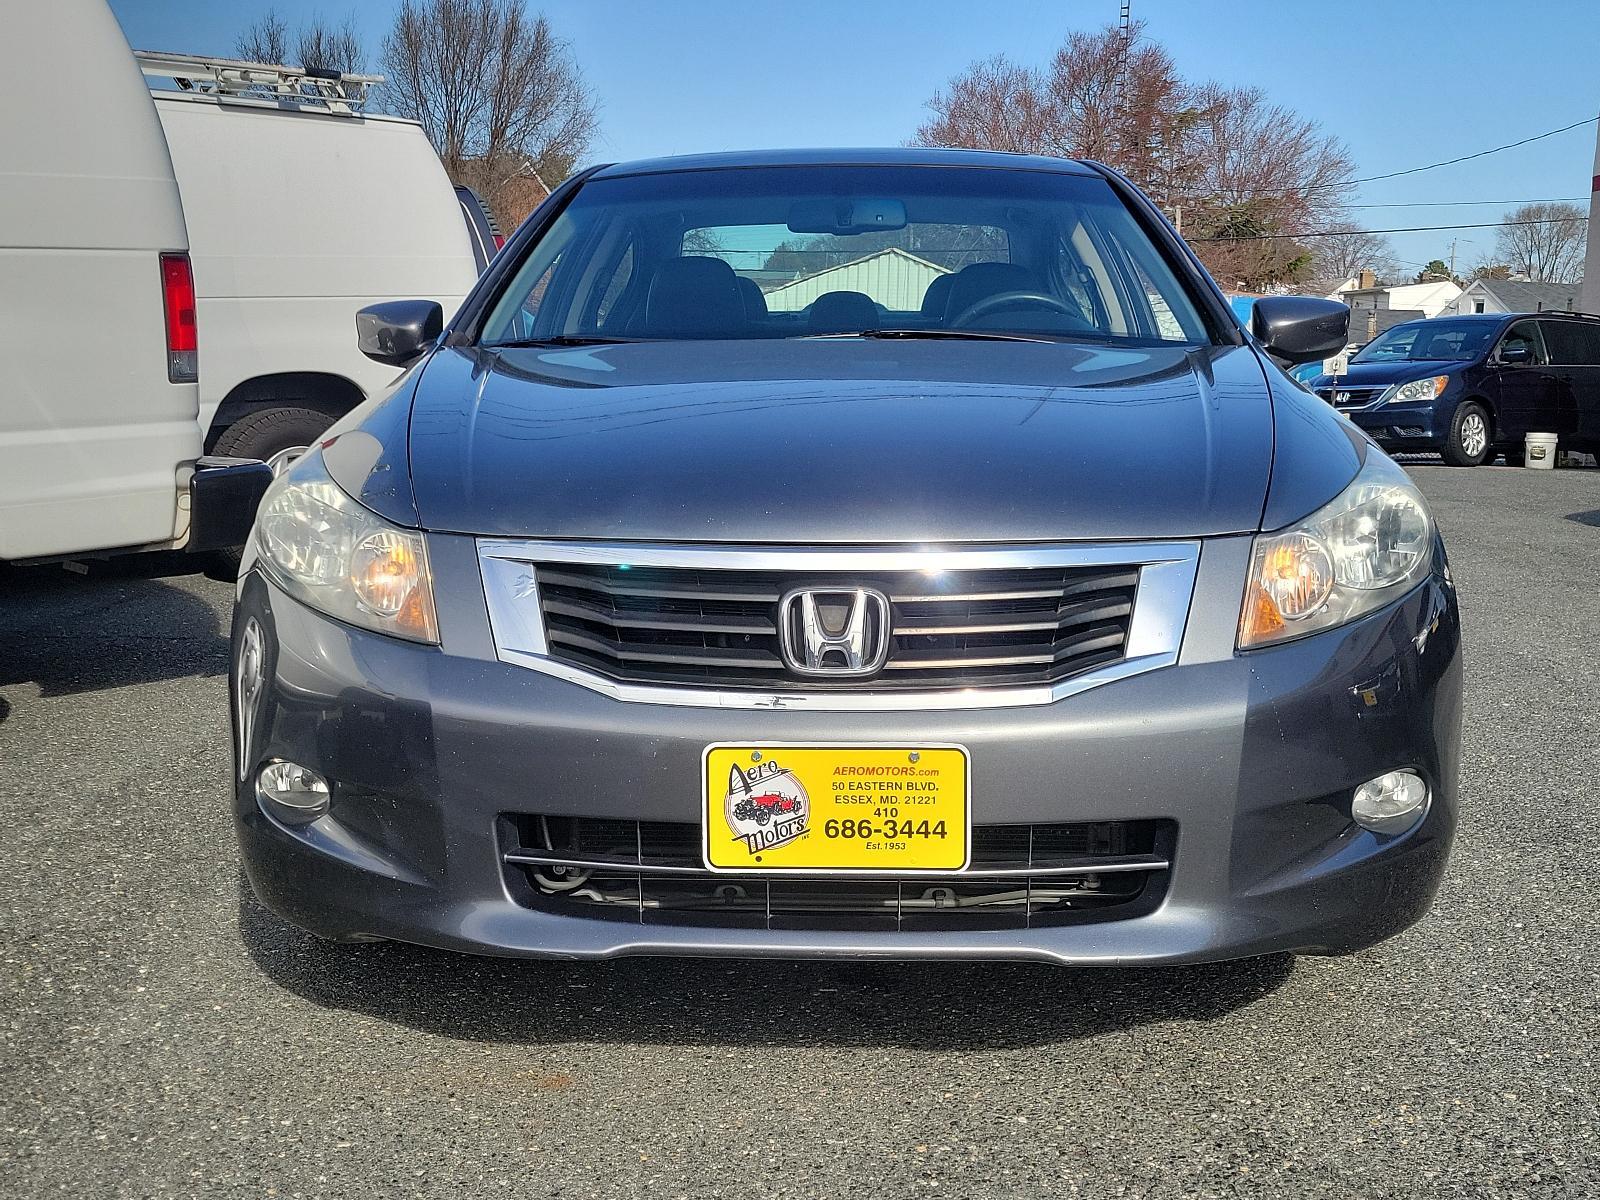 2008 Polished Metal Metallic - GR /Black - BK Honda Accord Sdn EX-L (1HGCP36898A) with an 3.5L SOHC MPFI 24-valve i-VTEC V6 engine engine, located at 50 Eastern Blvd., Essex, MD, 21221, (410) 686-3444, 39.304367, -76.484947 - Presenting the robust and dependable 2008 Honda Accord Sdn EX-L 4dr V6, presented in a timeless gray exterior. This fantastic sedan breathes power with its 3.5l SOHC MPFI 24-valve i-VTEC V6 engine, combining both performance and efficiency seamlessly. The EX-L trim adds a touch of luxury with cozy l - Photo #1